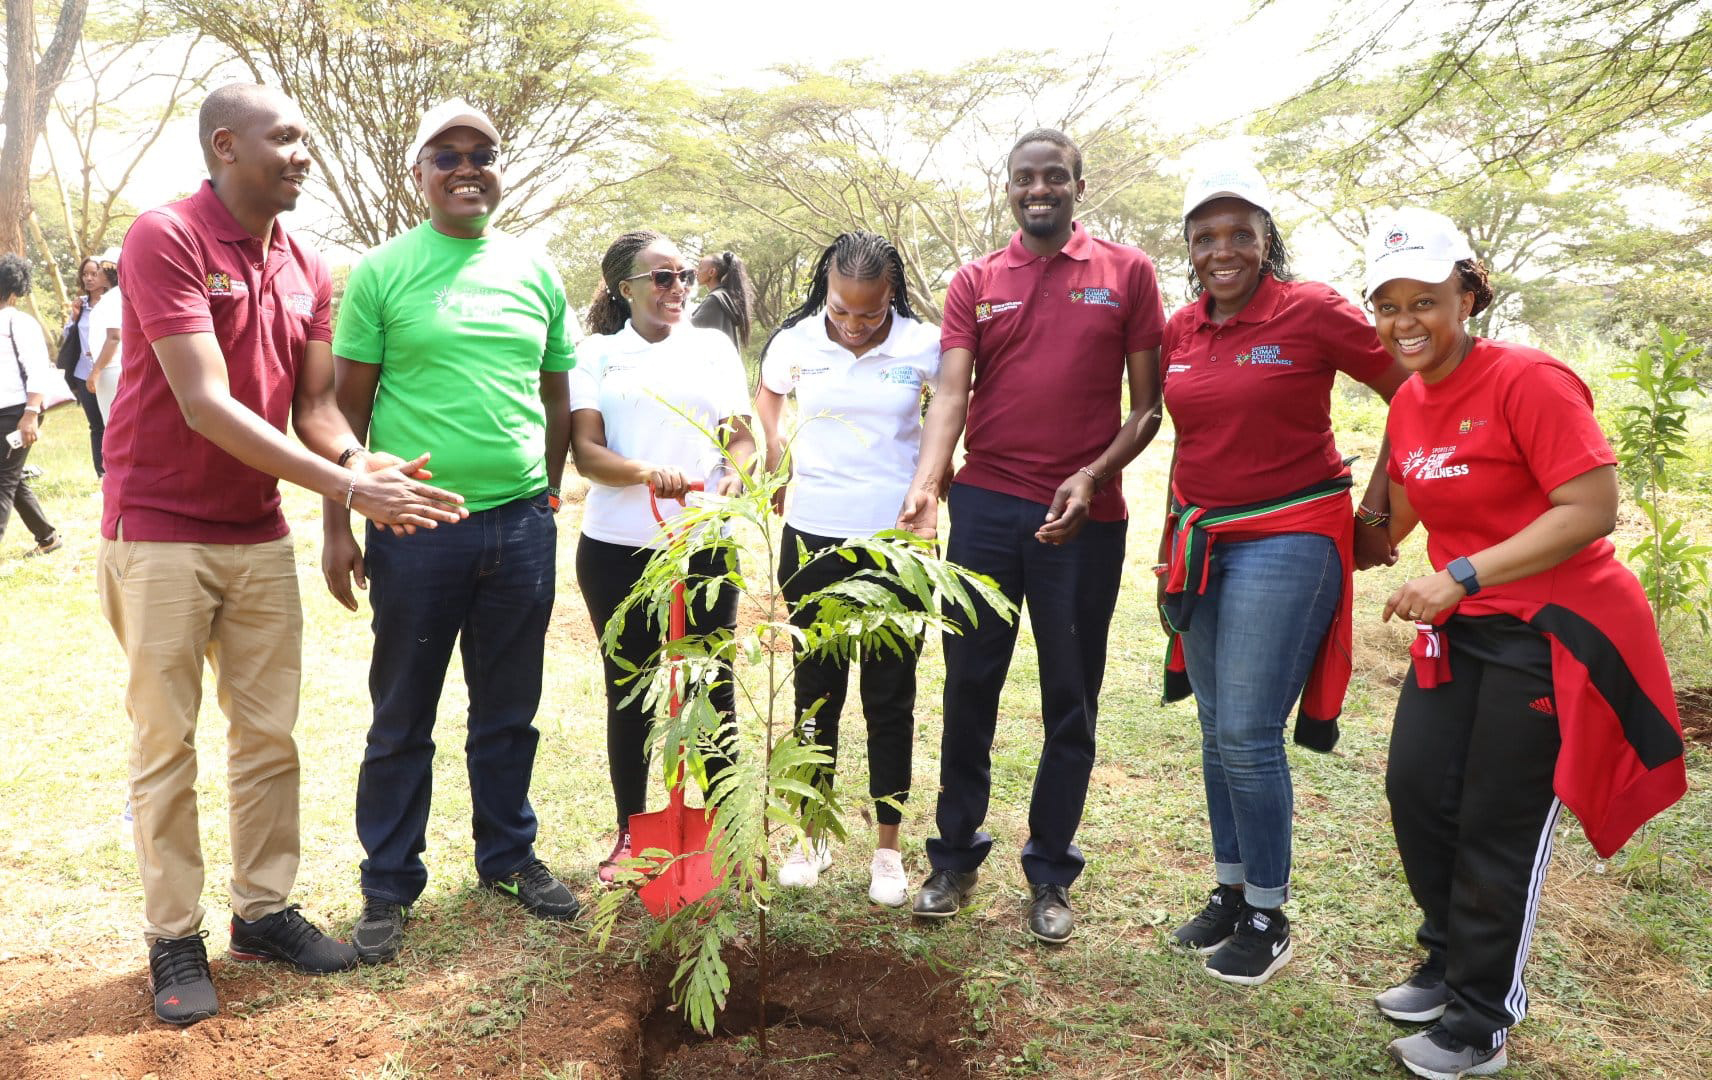 Board Participates in the Sports for Climate Action and Wellness   Place 1st Photo here: Tree Planting CS  The Kenya Film Classification Board (KFCB) staff participated in the Sports for Climate Action and Wellness Initiative, organized by the Ministry of Youth Affairs, the Arts and Sports, at the Kasarani Stadium, Nairobi, on Monday 19th June, 2023. Led by the Cabinet Secretary (CS) Hon. Ababu Namwamba E.G.H, the initiative brought together all the State Agencies and Departments under the Ministry of Youth Affairs, the Arts and Sports.   Place 2nd photo here: Tree planting 2  The CS later, led the team to a Tree Planting exercise dubbed: #SportsForClimateAction, and which saw the team plant 7000 trees around the Kasarani Stadium grounds, a noble cause aimed at mitigating the ravaging effects of climate change.  The Tree Planting exercise is also aligned with the Presidential Directive of planting 15 billion trees by 2032.